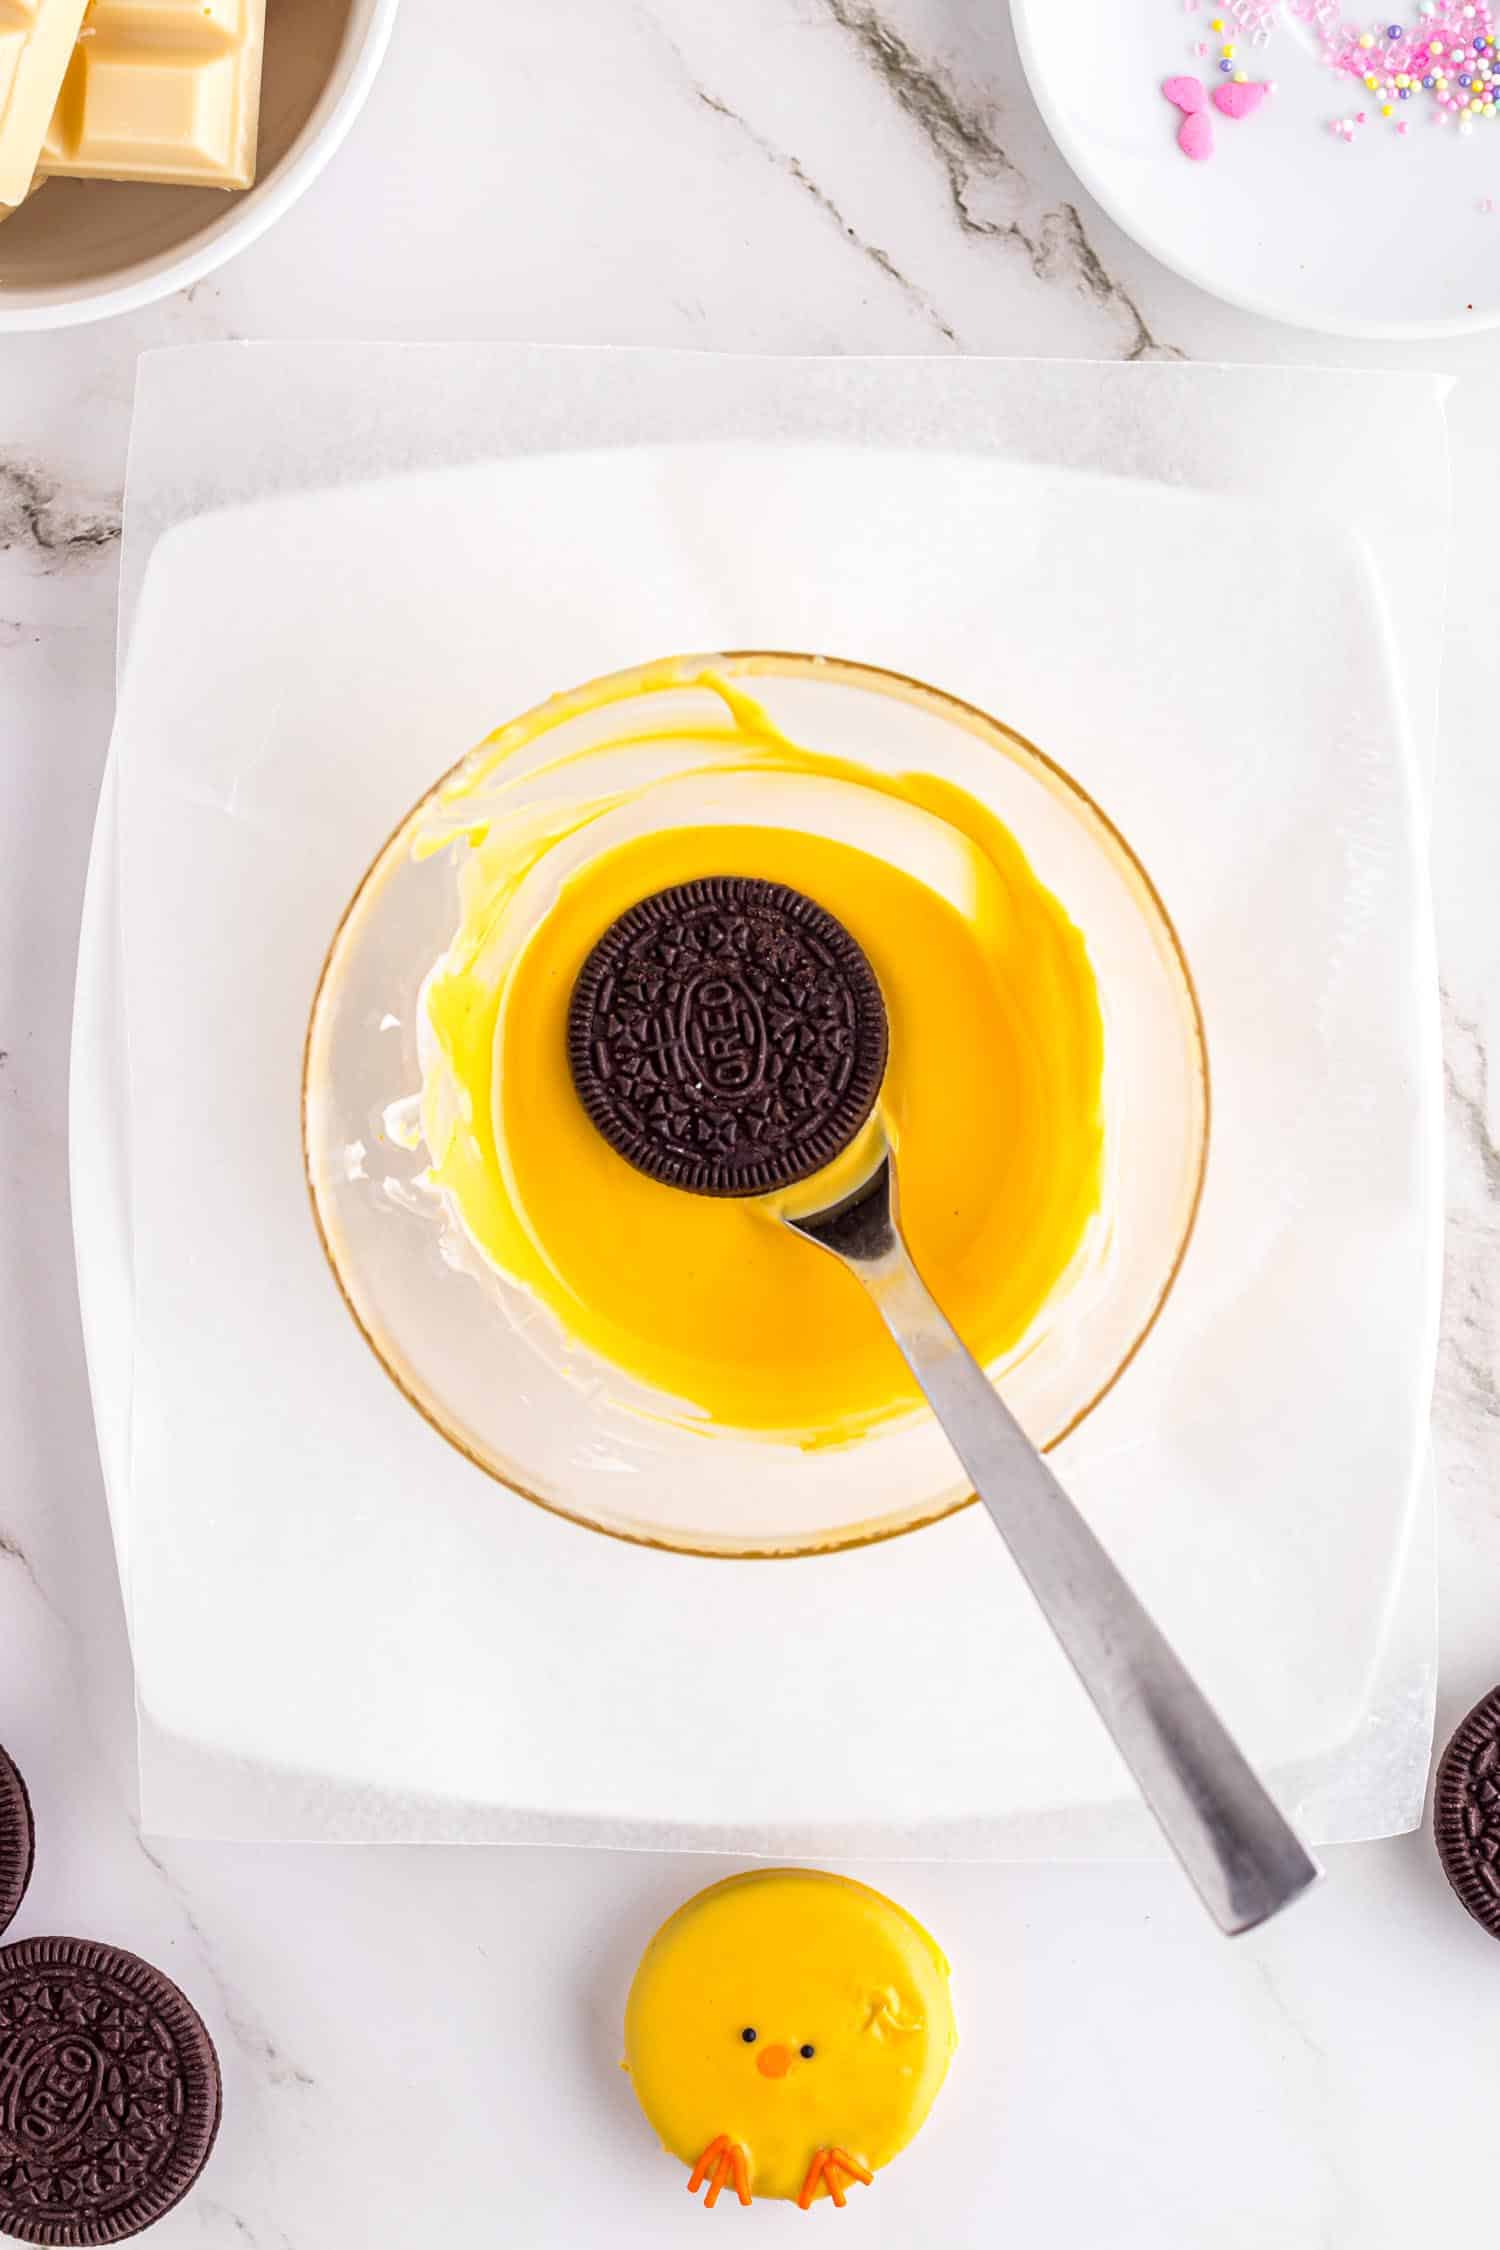 Plain Oreo cookie being lowered on fork into a mixing bowl filled with yellow colored melted chocolate